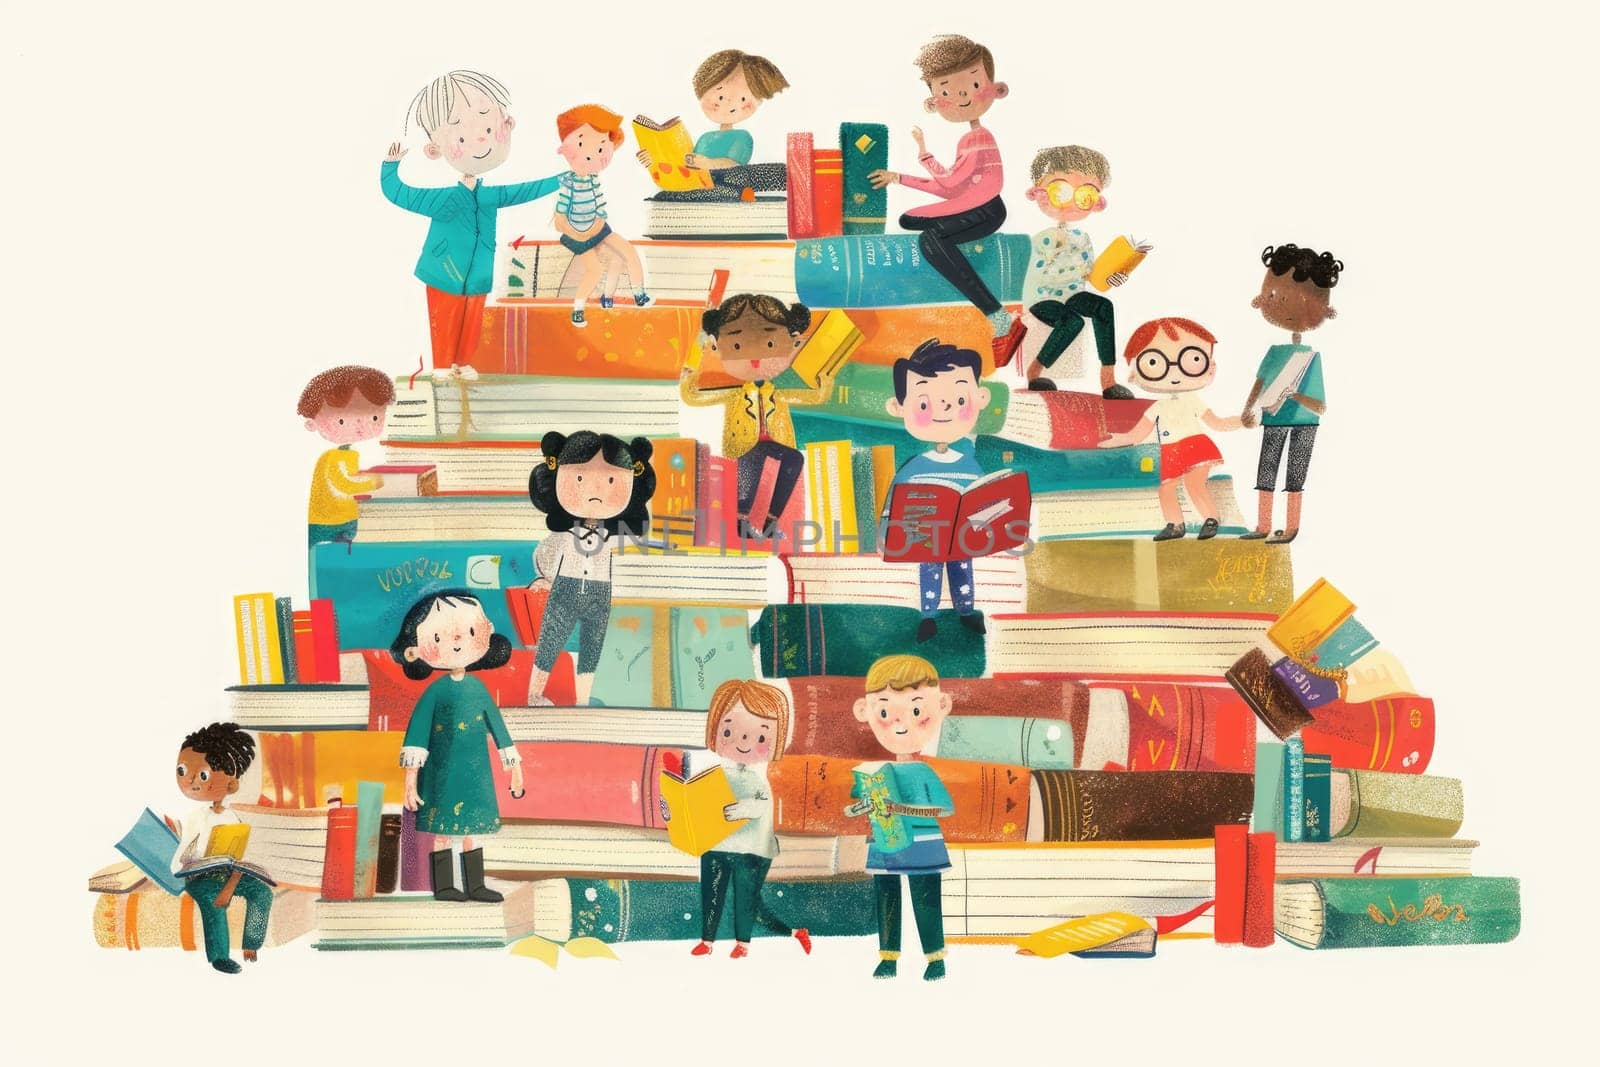 World Book Day by illustrating a diverse community coming together to celebrate the joy of reading. by Chawagen